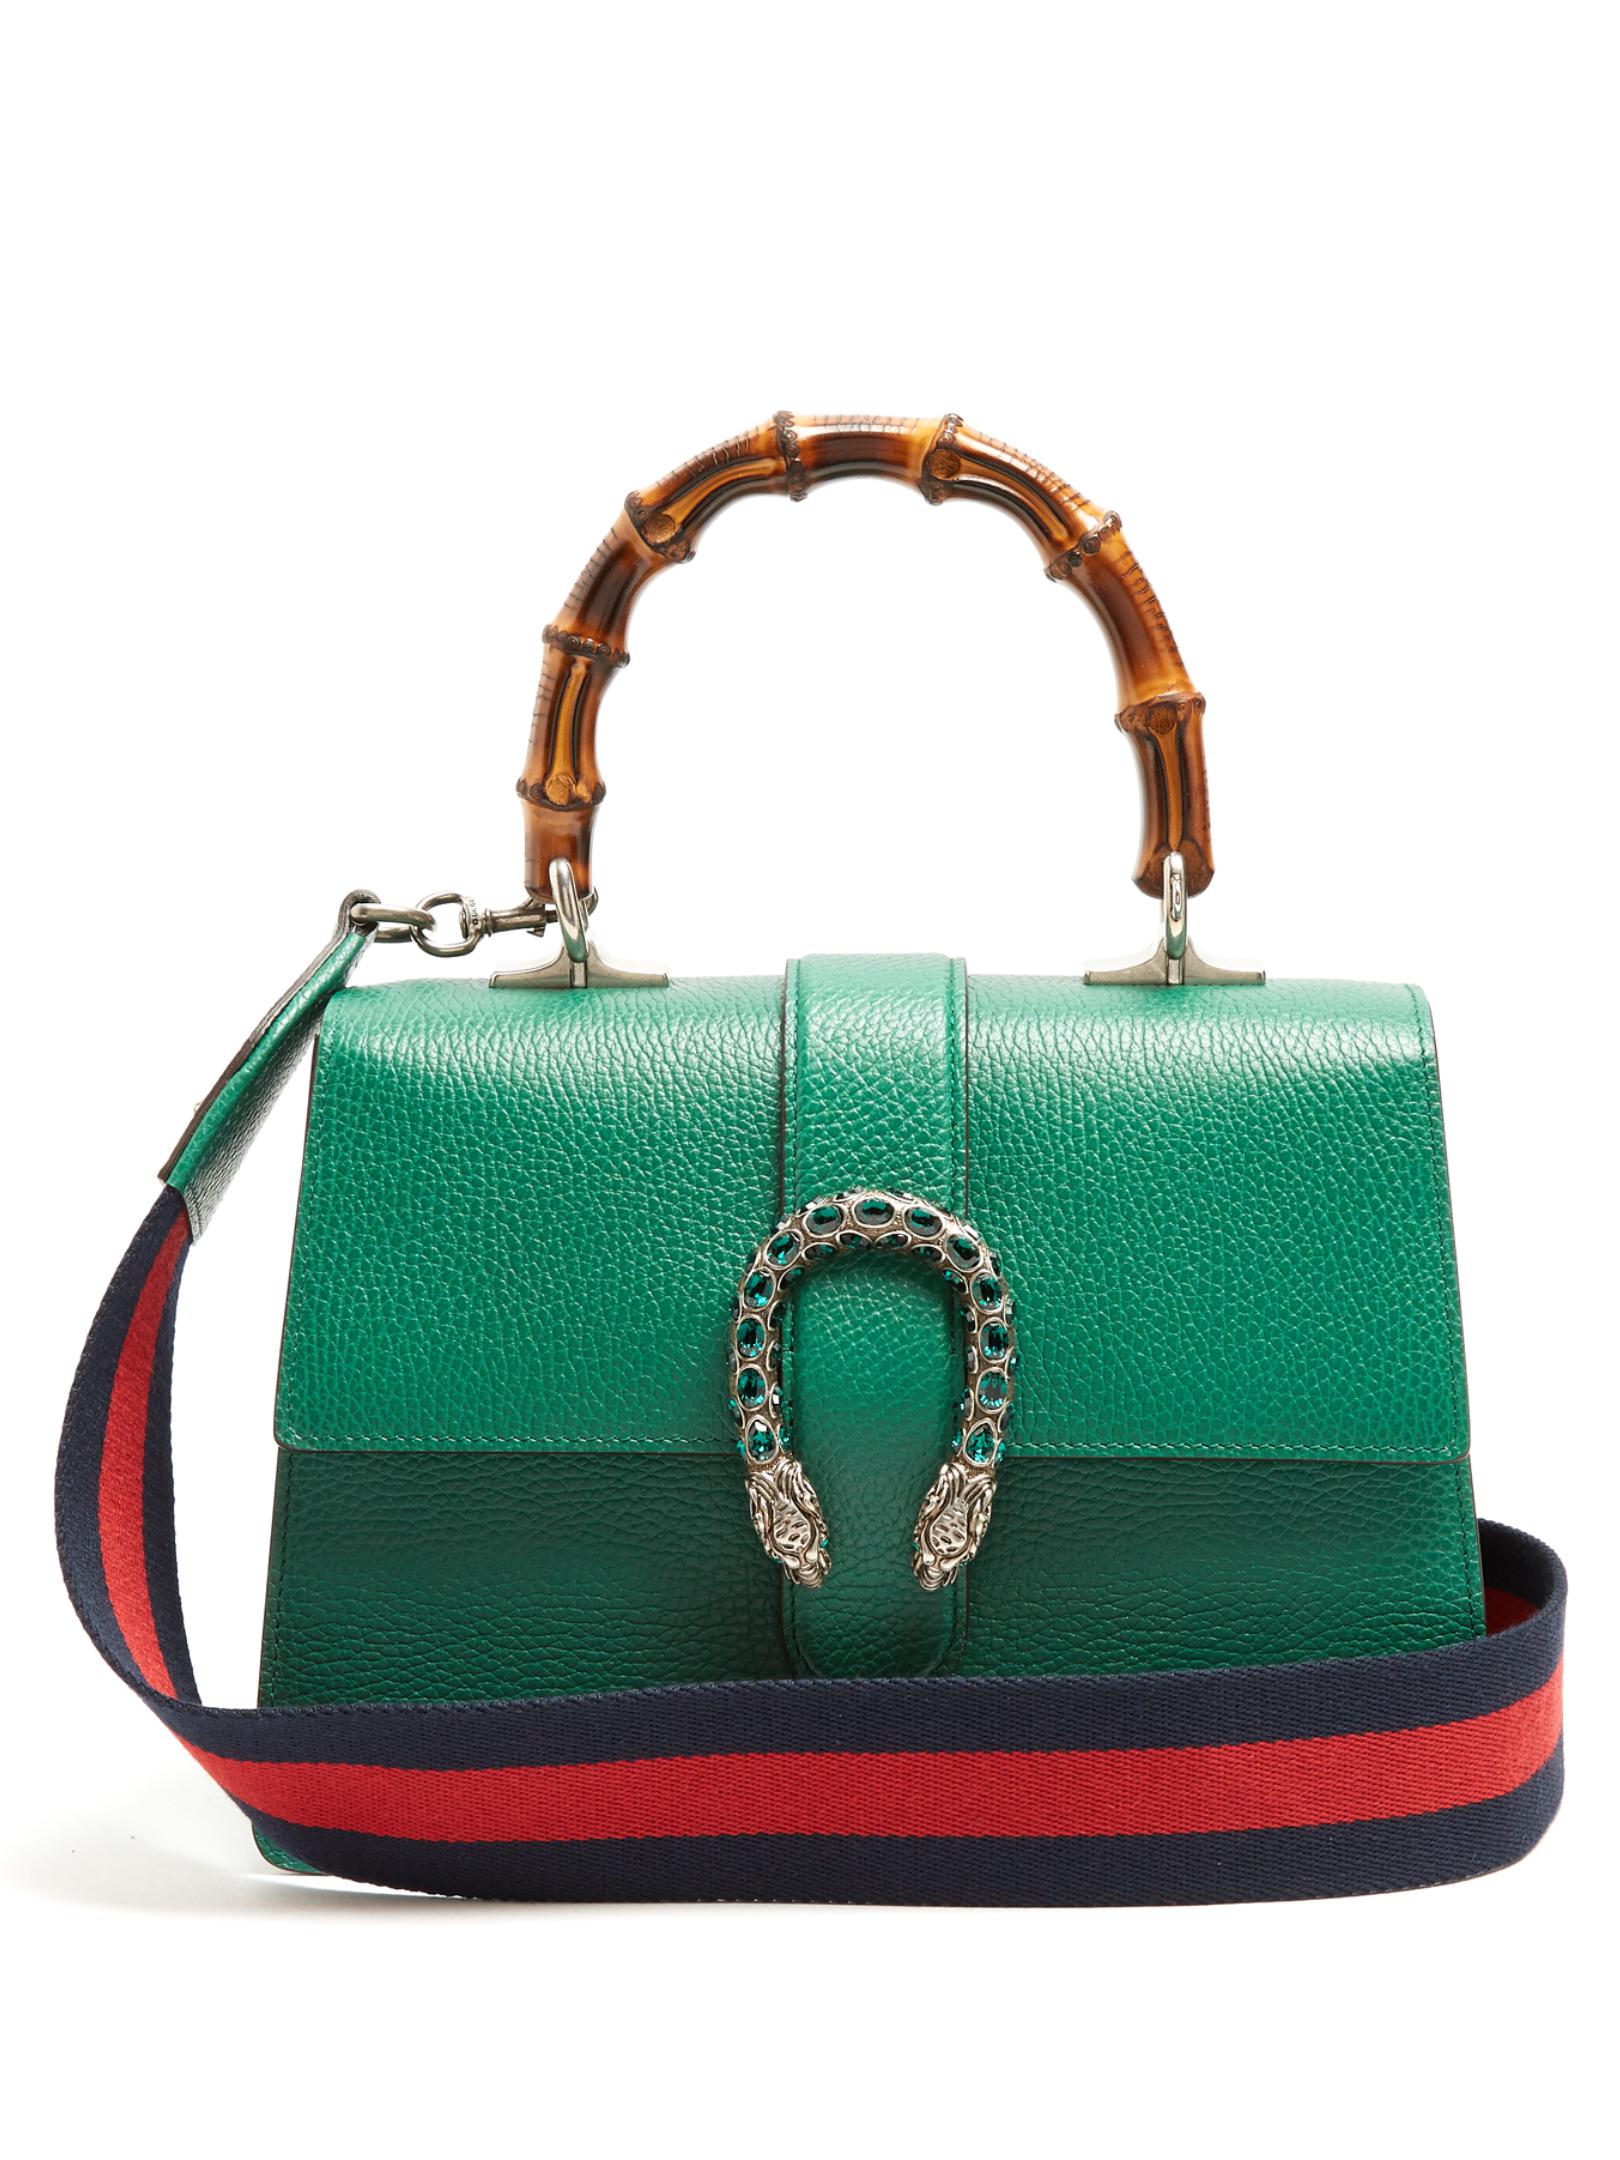 Lyst - Gucci Dionysus Bamboo-handle Medium Leather Tote in Green